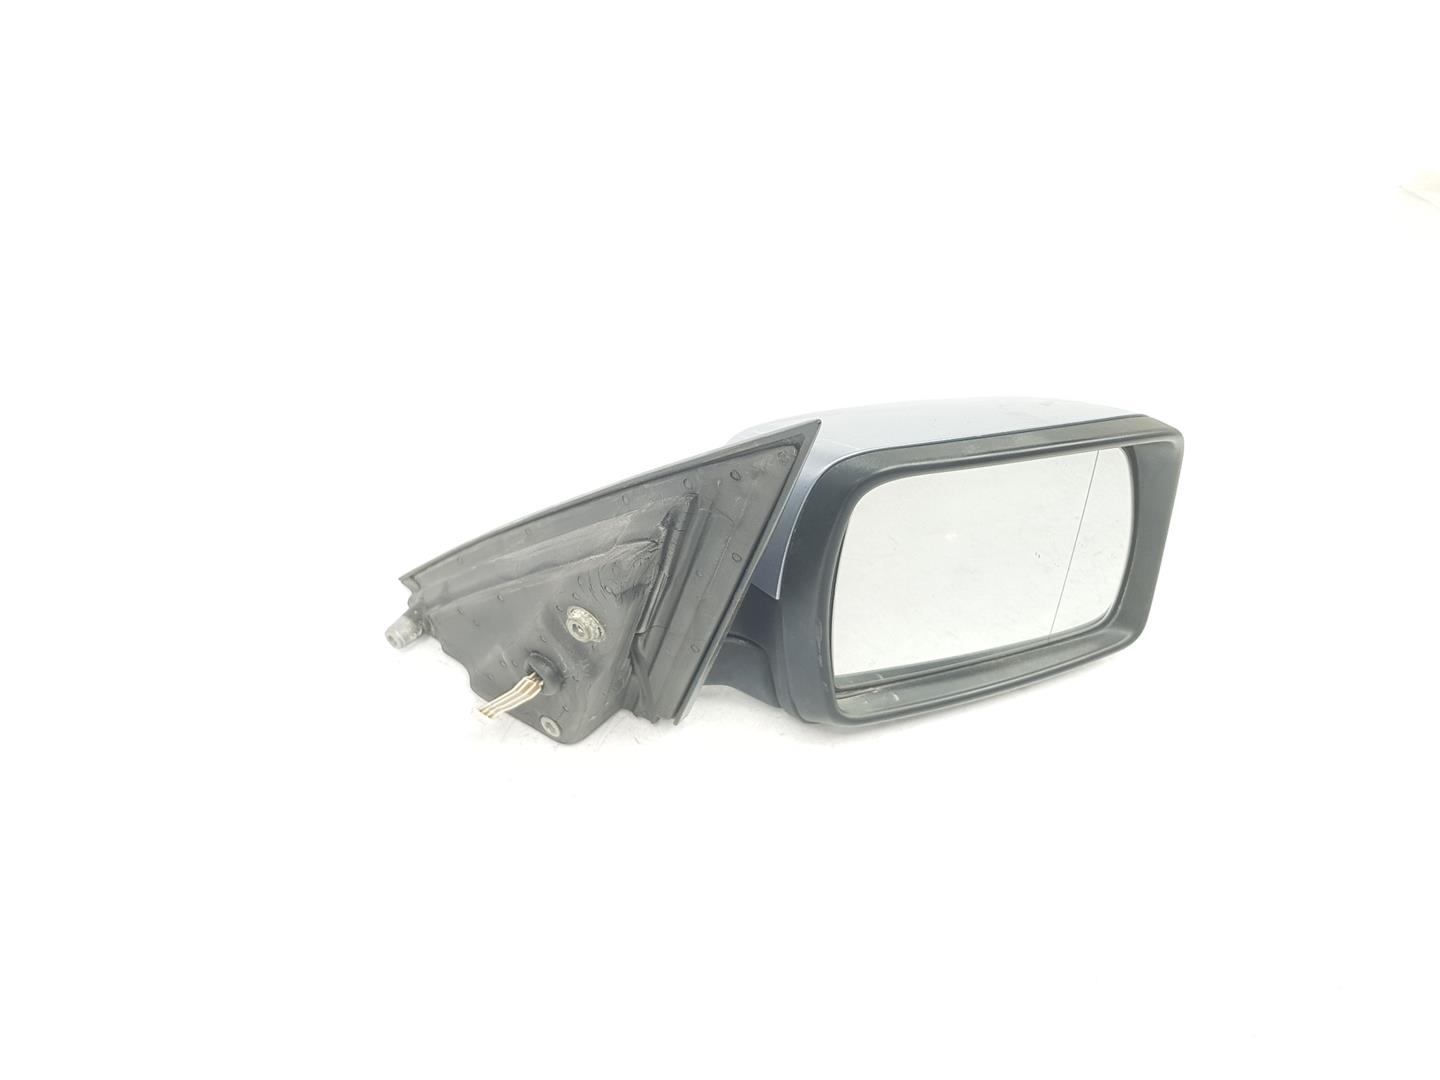 BMW X3 E83 (2003-2010) Right Side Wing Mirror 51163448166, 3448166 23799023